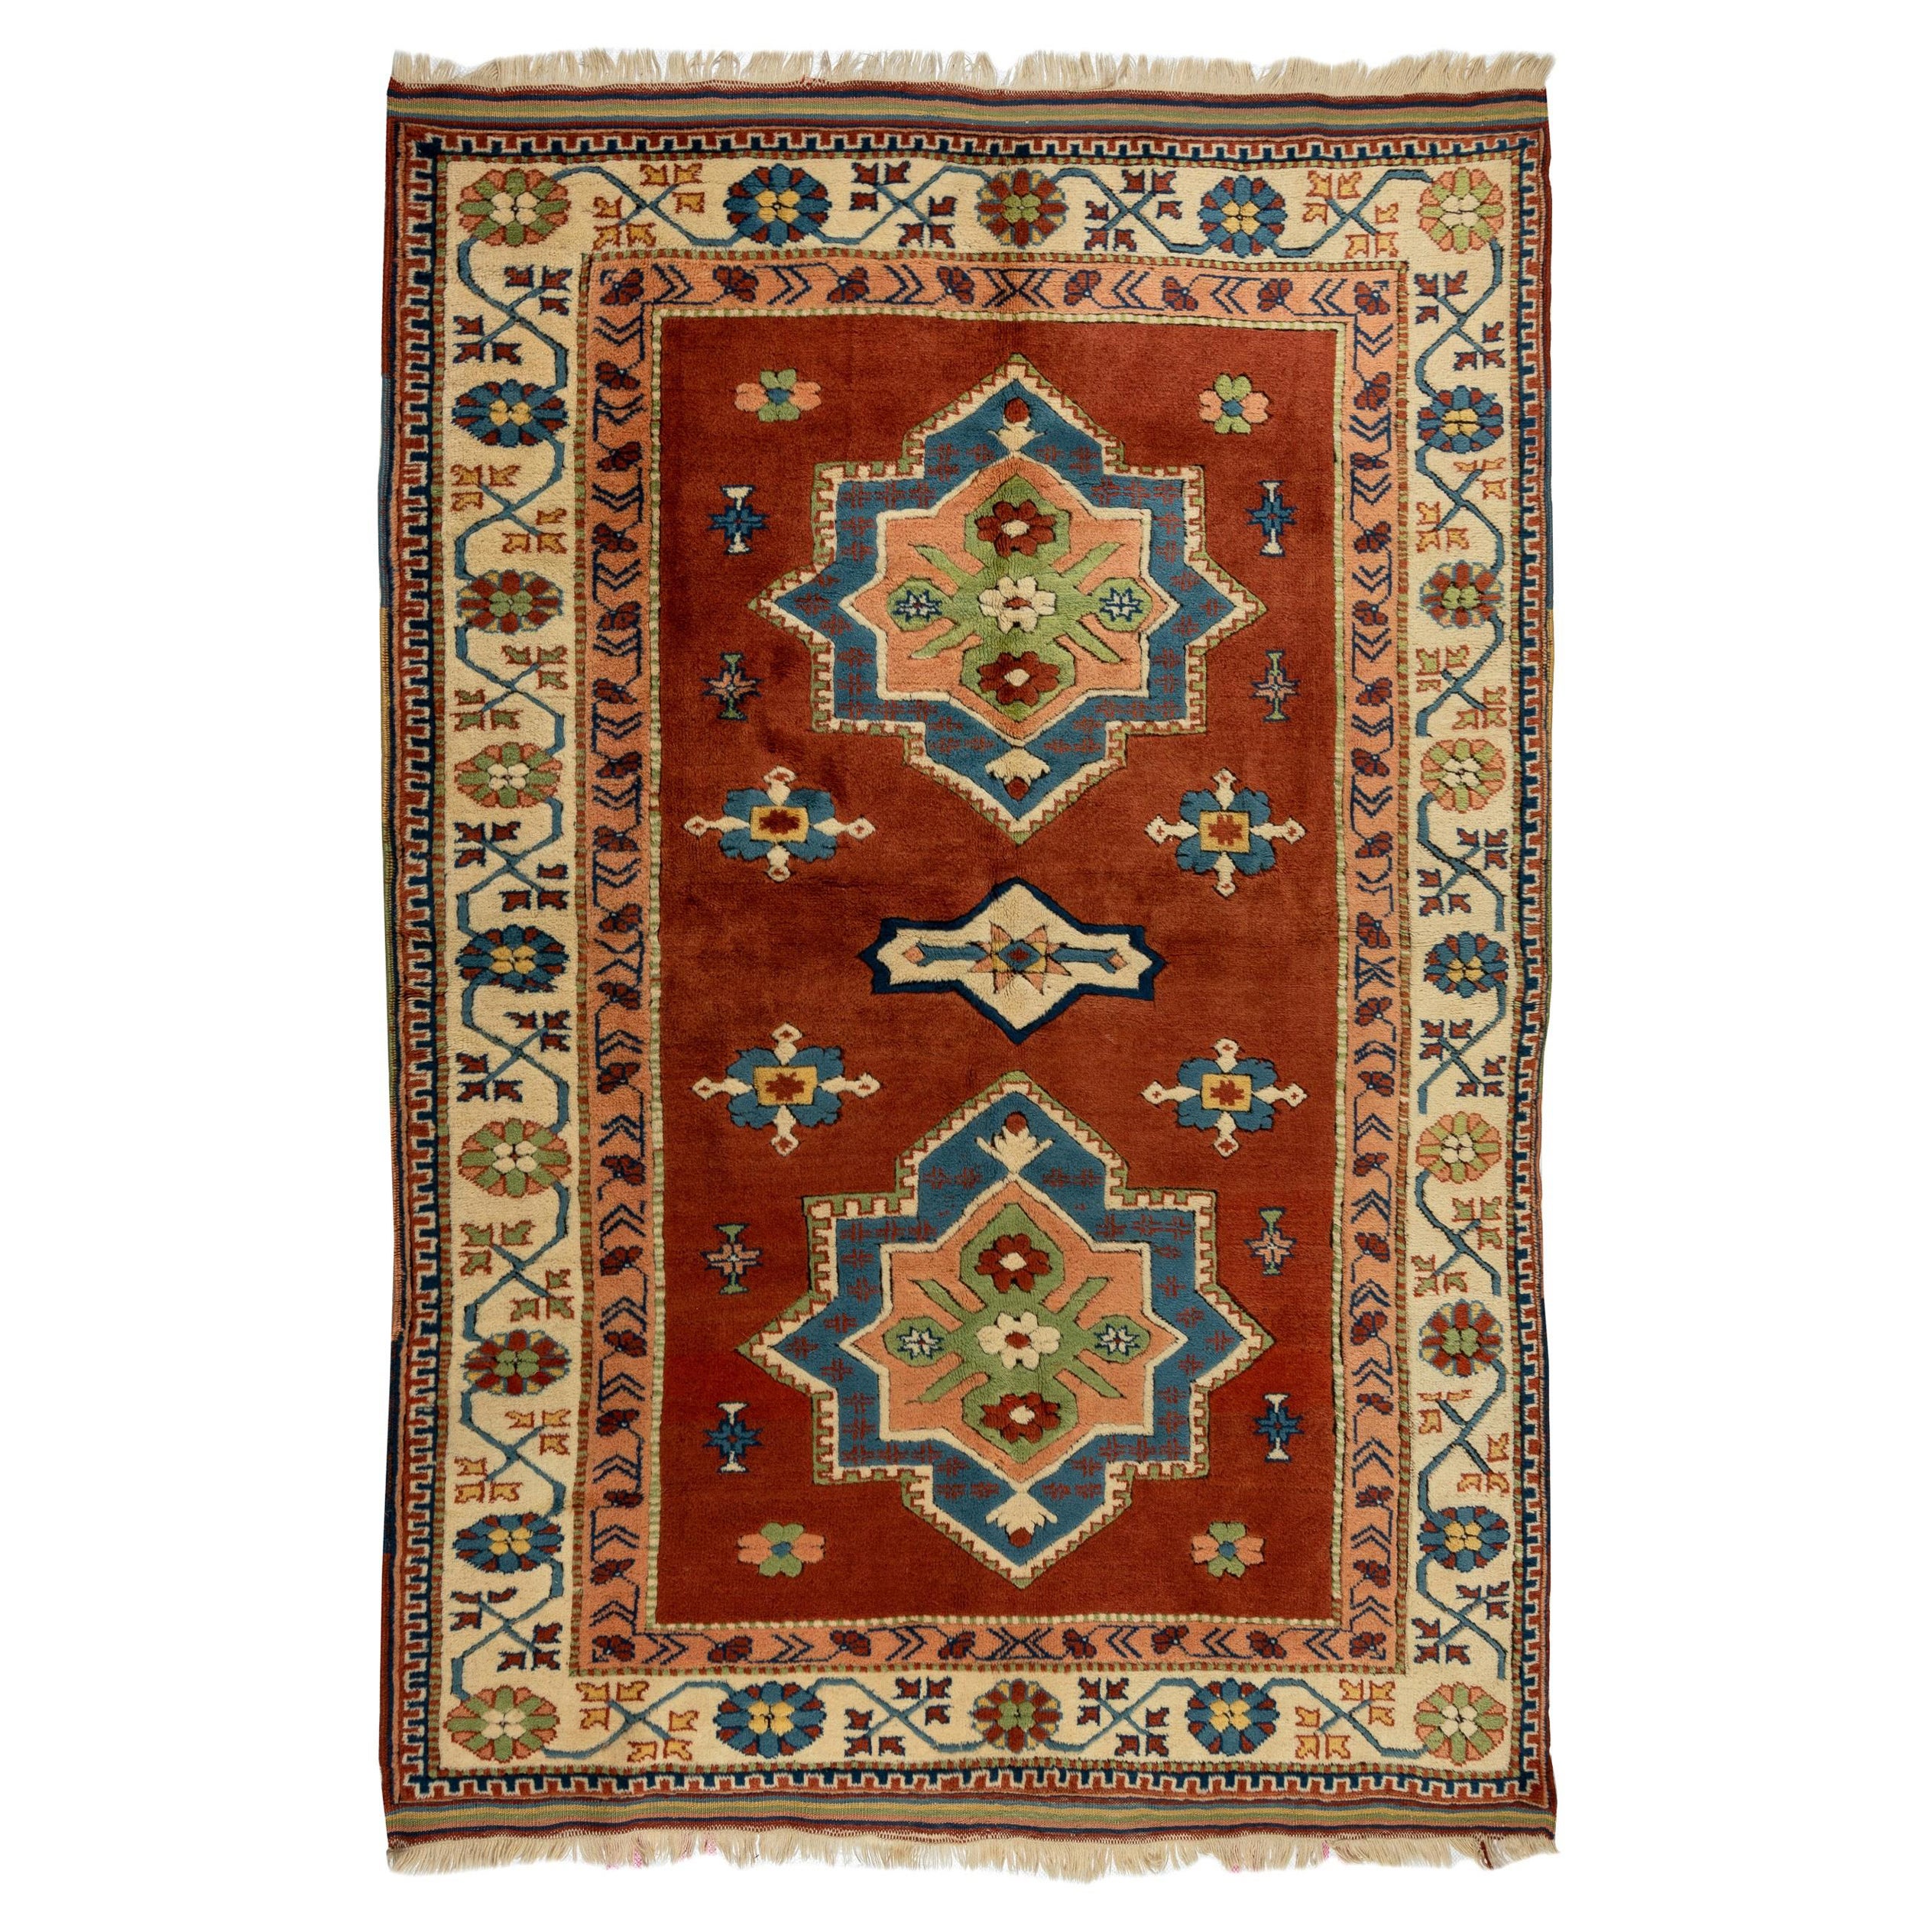 6x8 Ft New Hand Made Turkish Area Rug in Red & Beige. All Wool, Soft Medium Pile